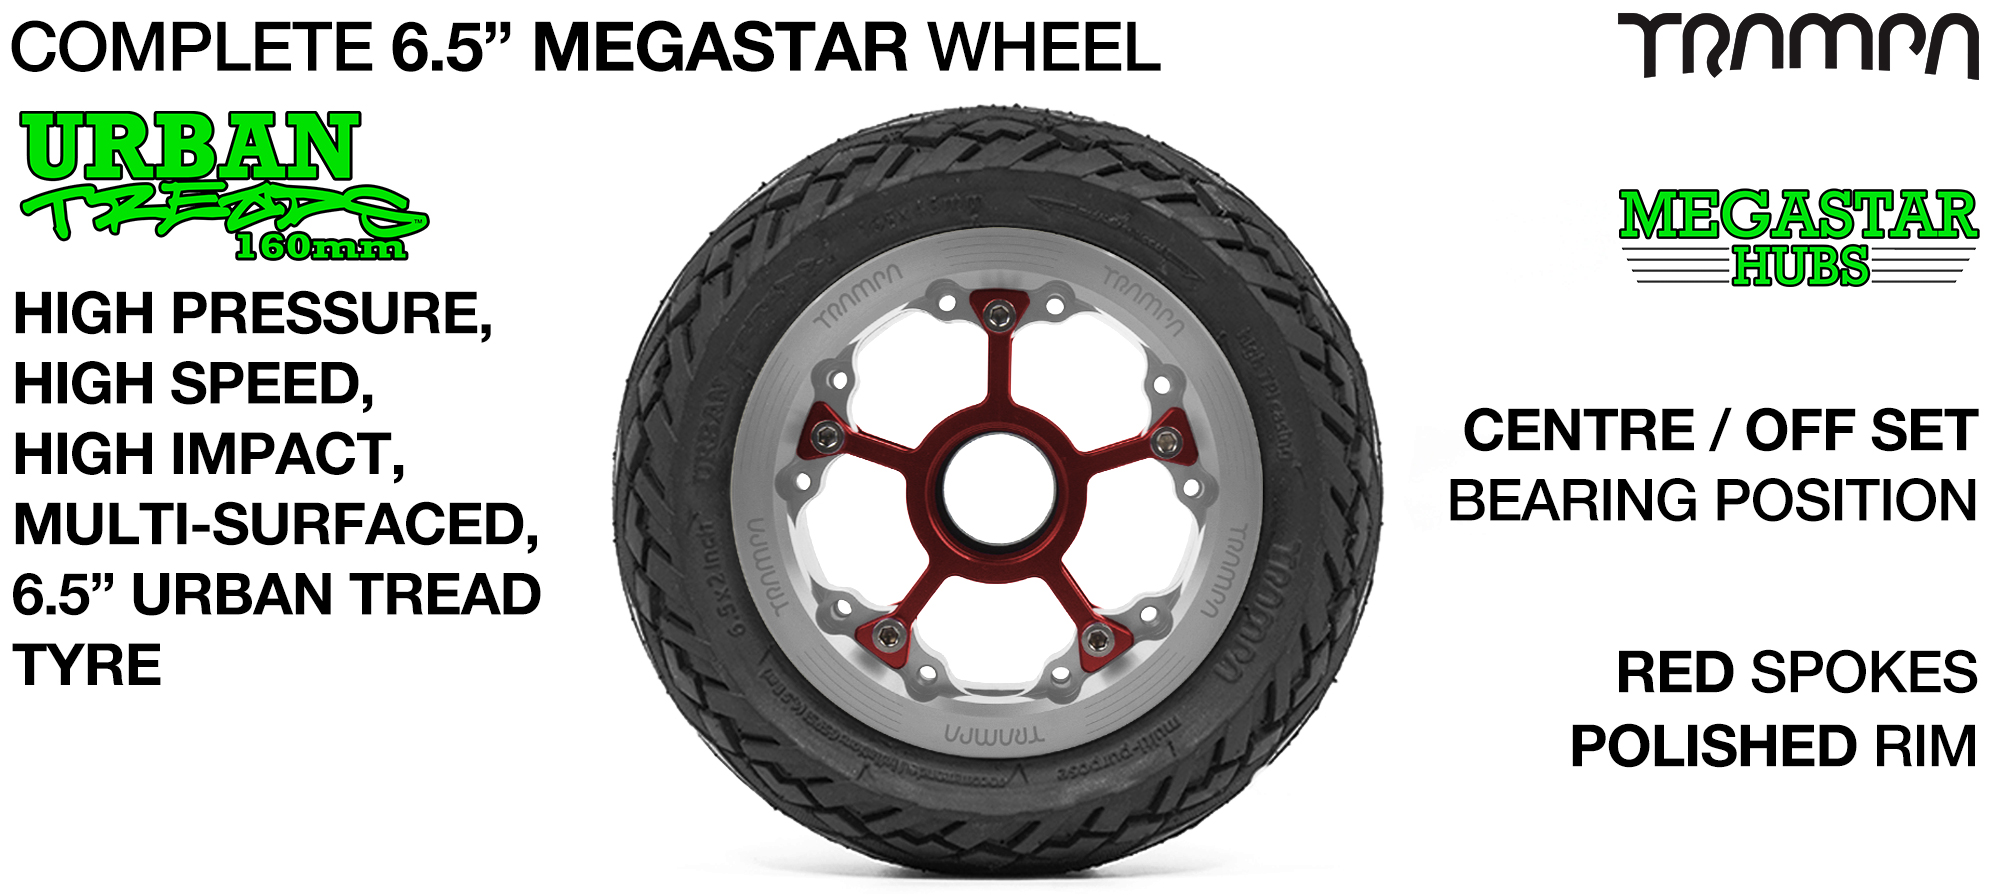 CENTER-SET MEGASTAR 8 Hub with POLISHED Rims & RED Spokes with the amazing Low Profile 6.5 Inch URBAN Treads Tyres